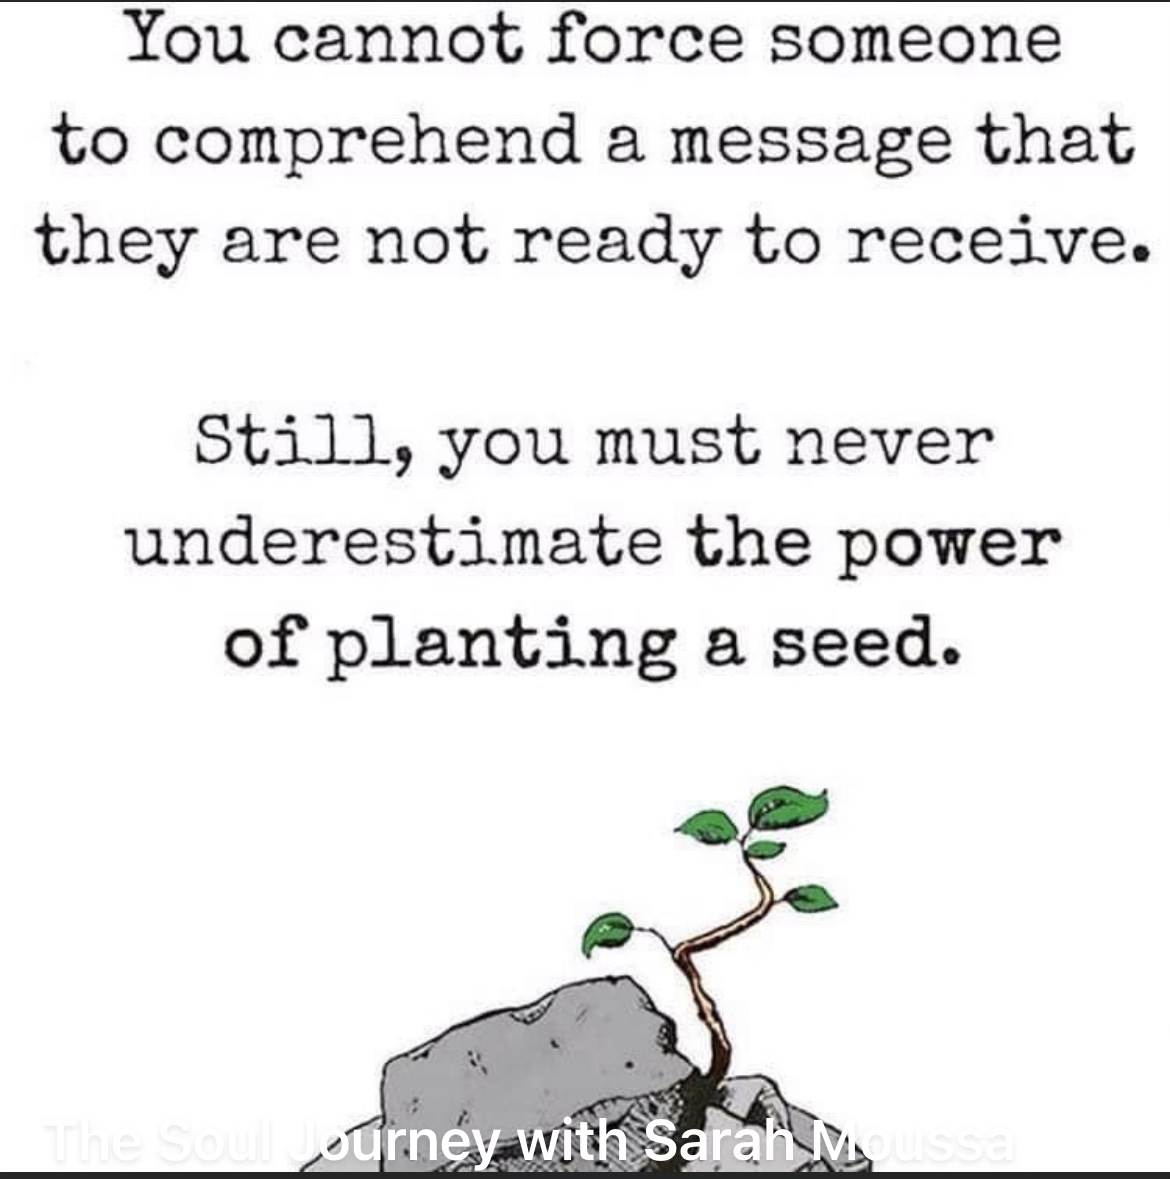 "You cannot force someone to comprehend a message that they are not ready to receive. Still, you must never underestimate the power of planting a seed." -Sarah Moussa